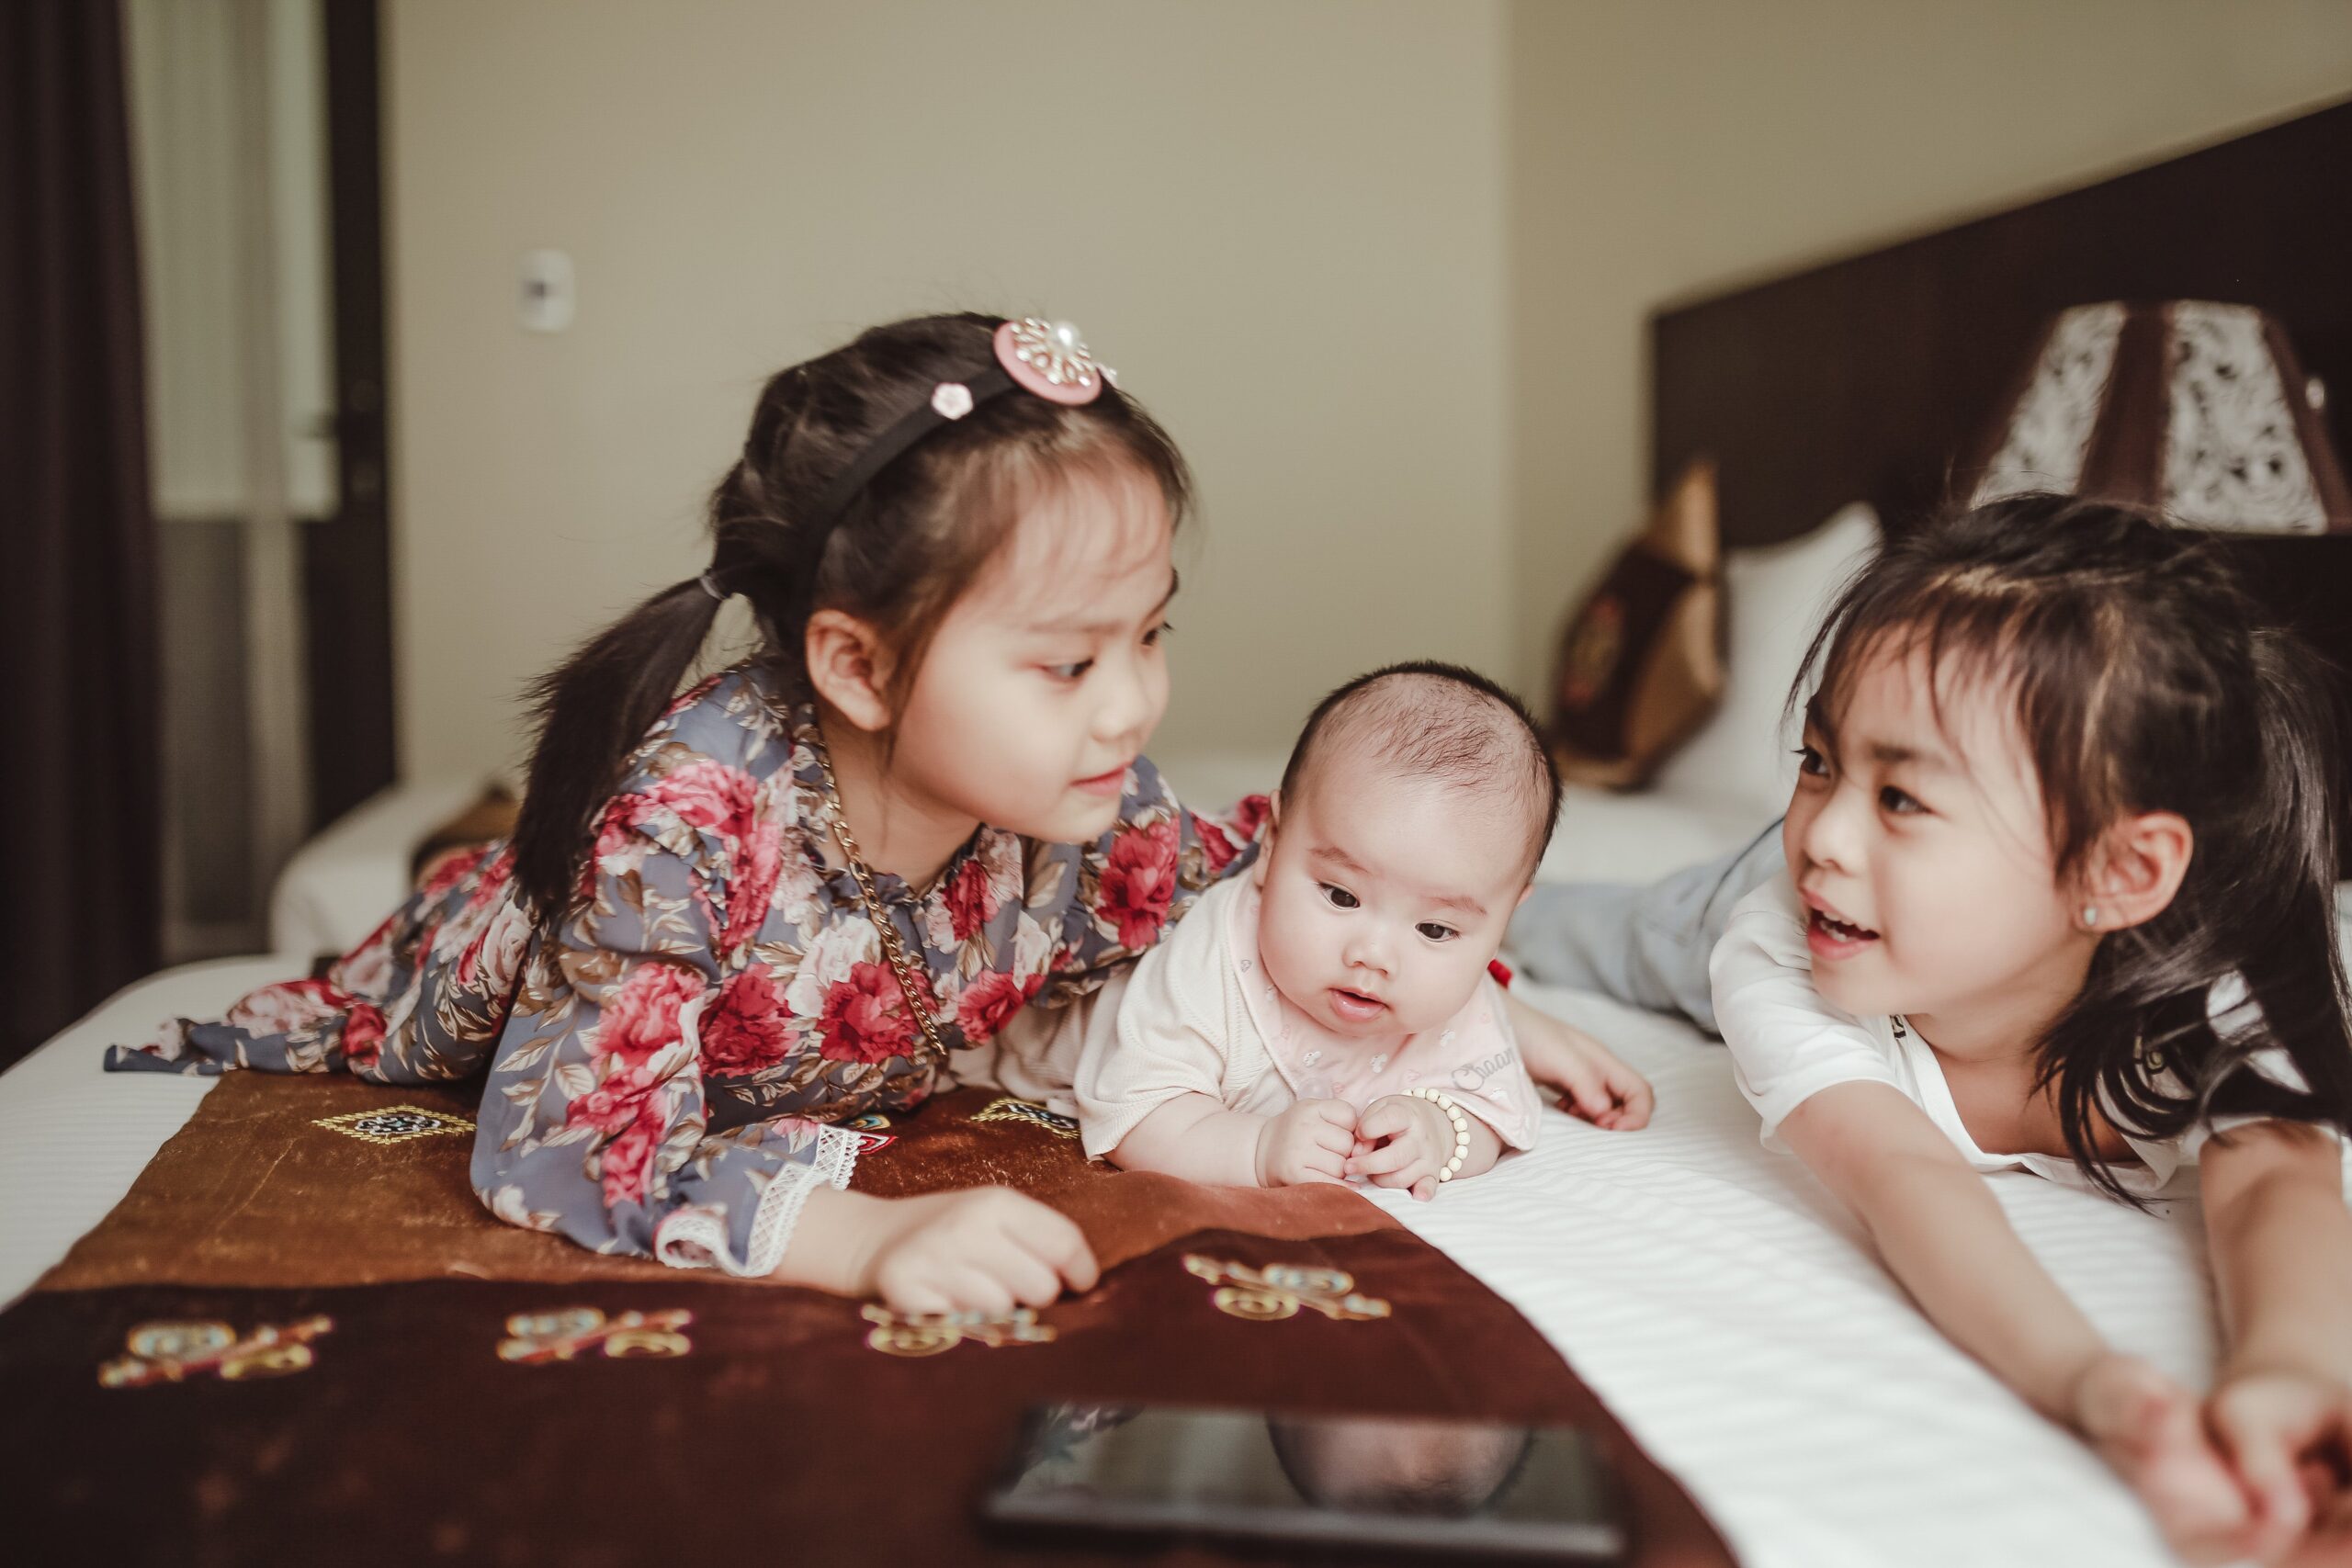 Sibling Jealousy: 3 Ways to Help Older Siblings Connect with the New Baby